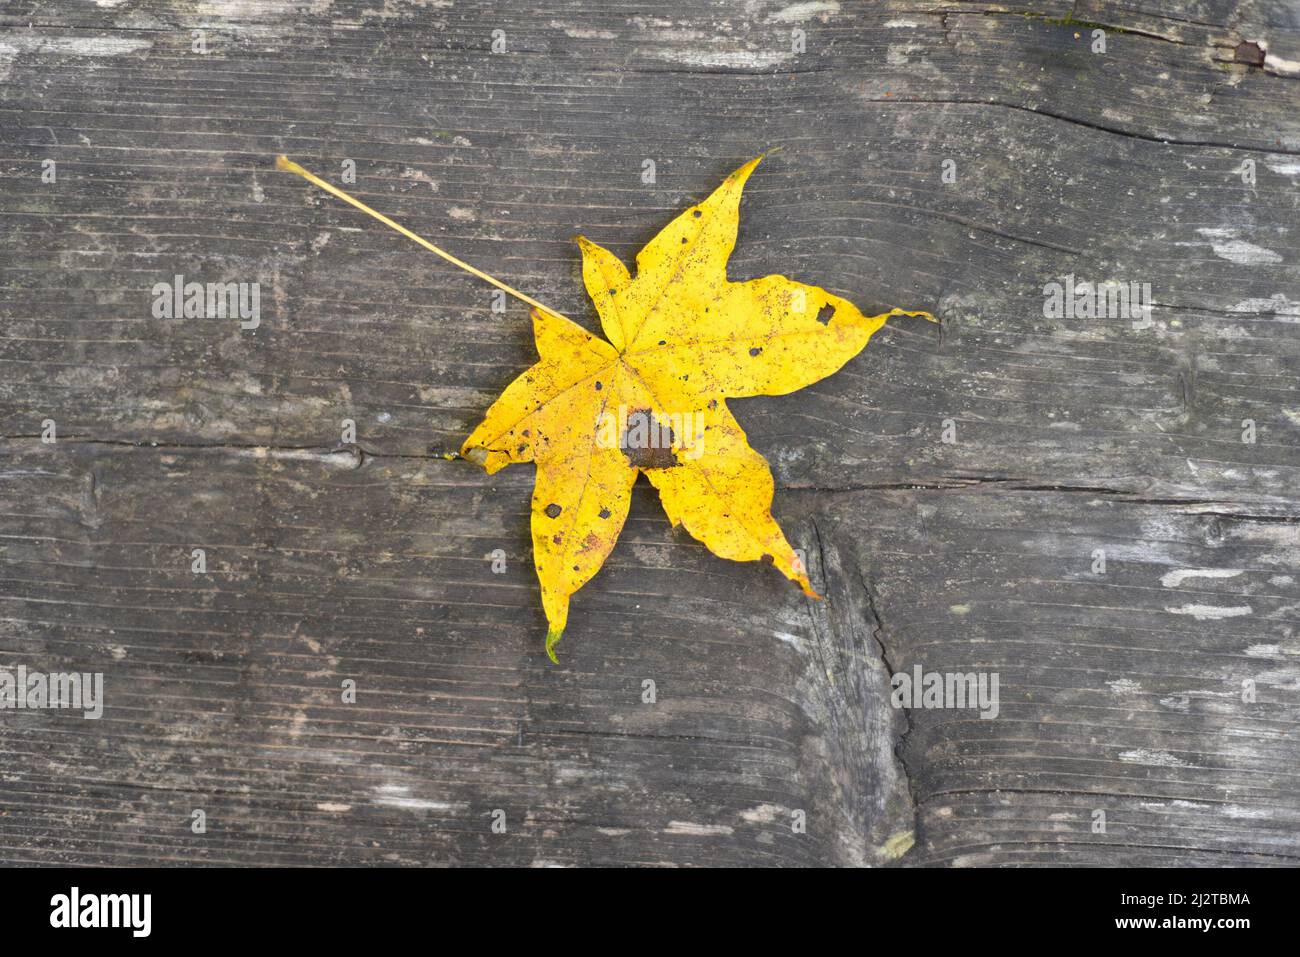 Bright yellow leaf on gray wooden background close up Stock Photo